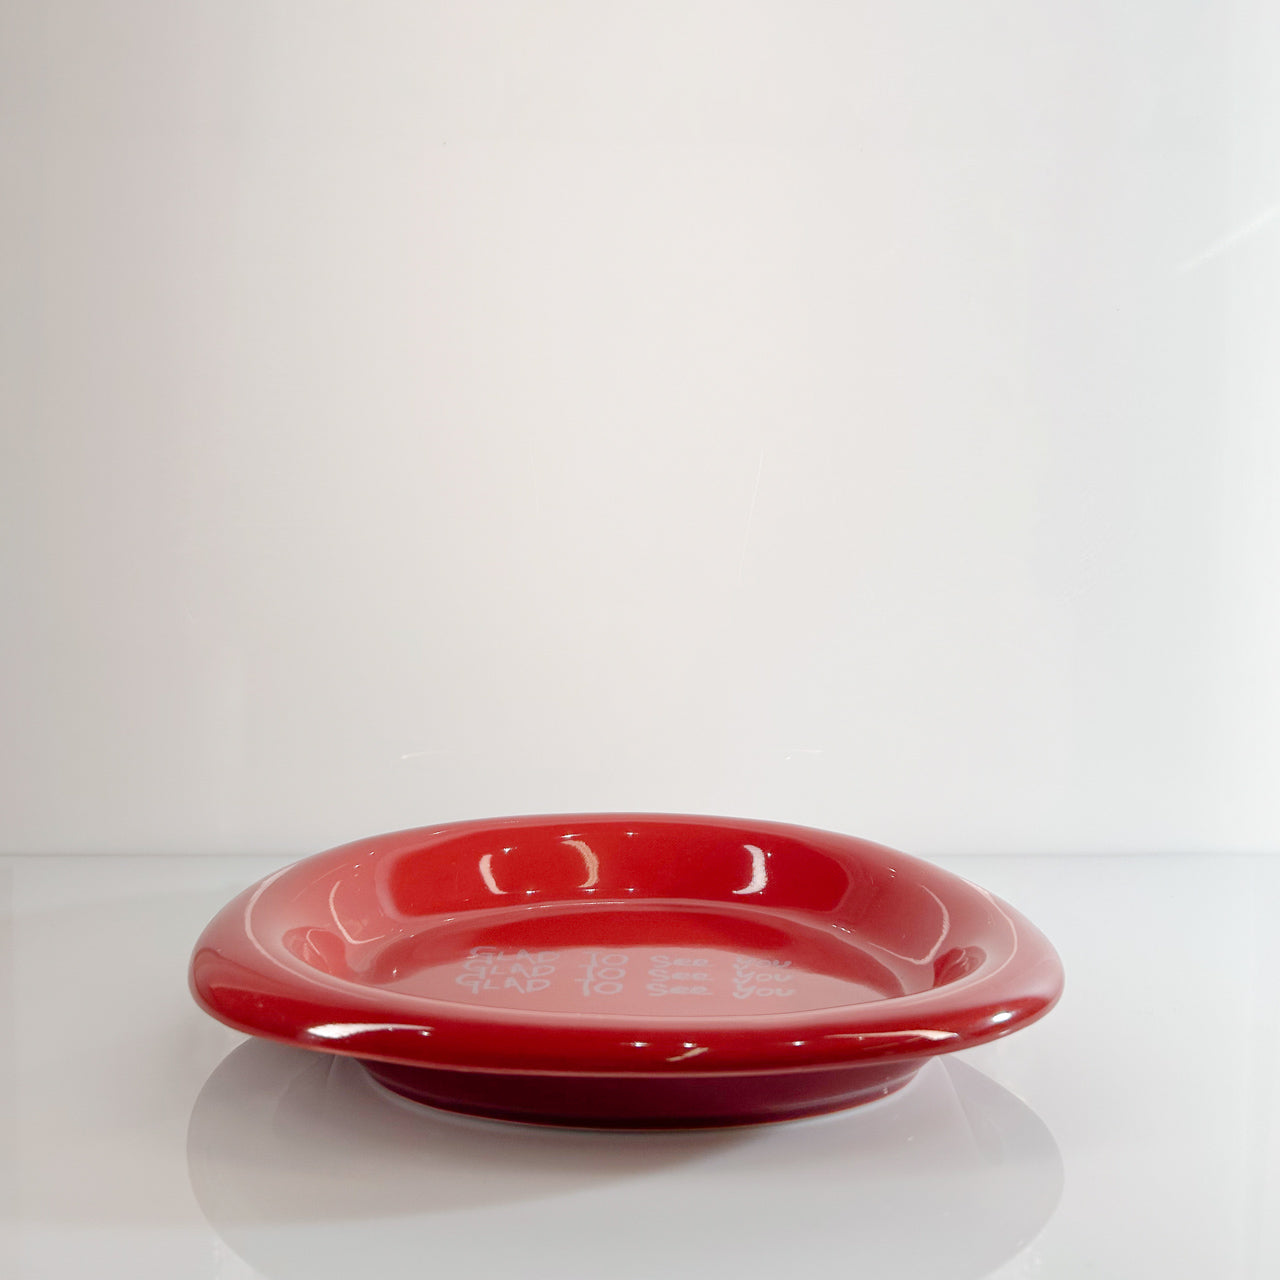 Glad To See You Ceramic Plate - Burgundy Red